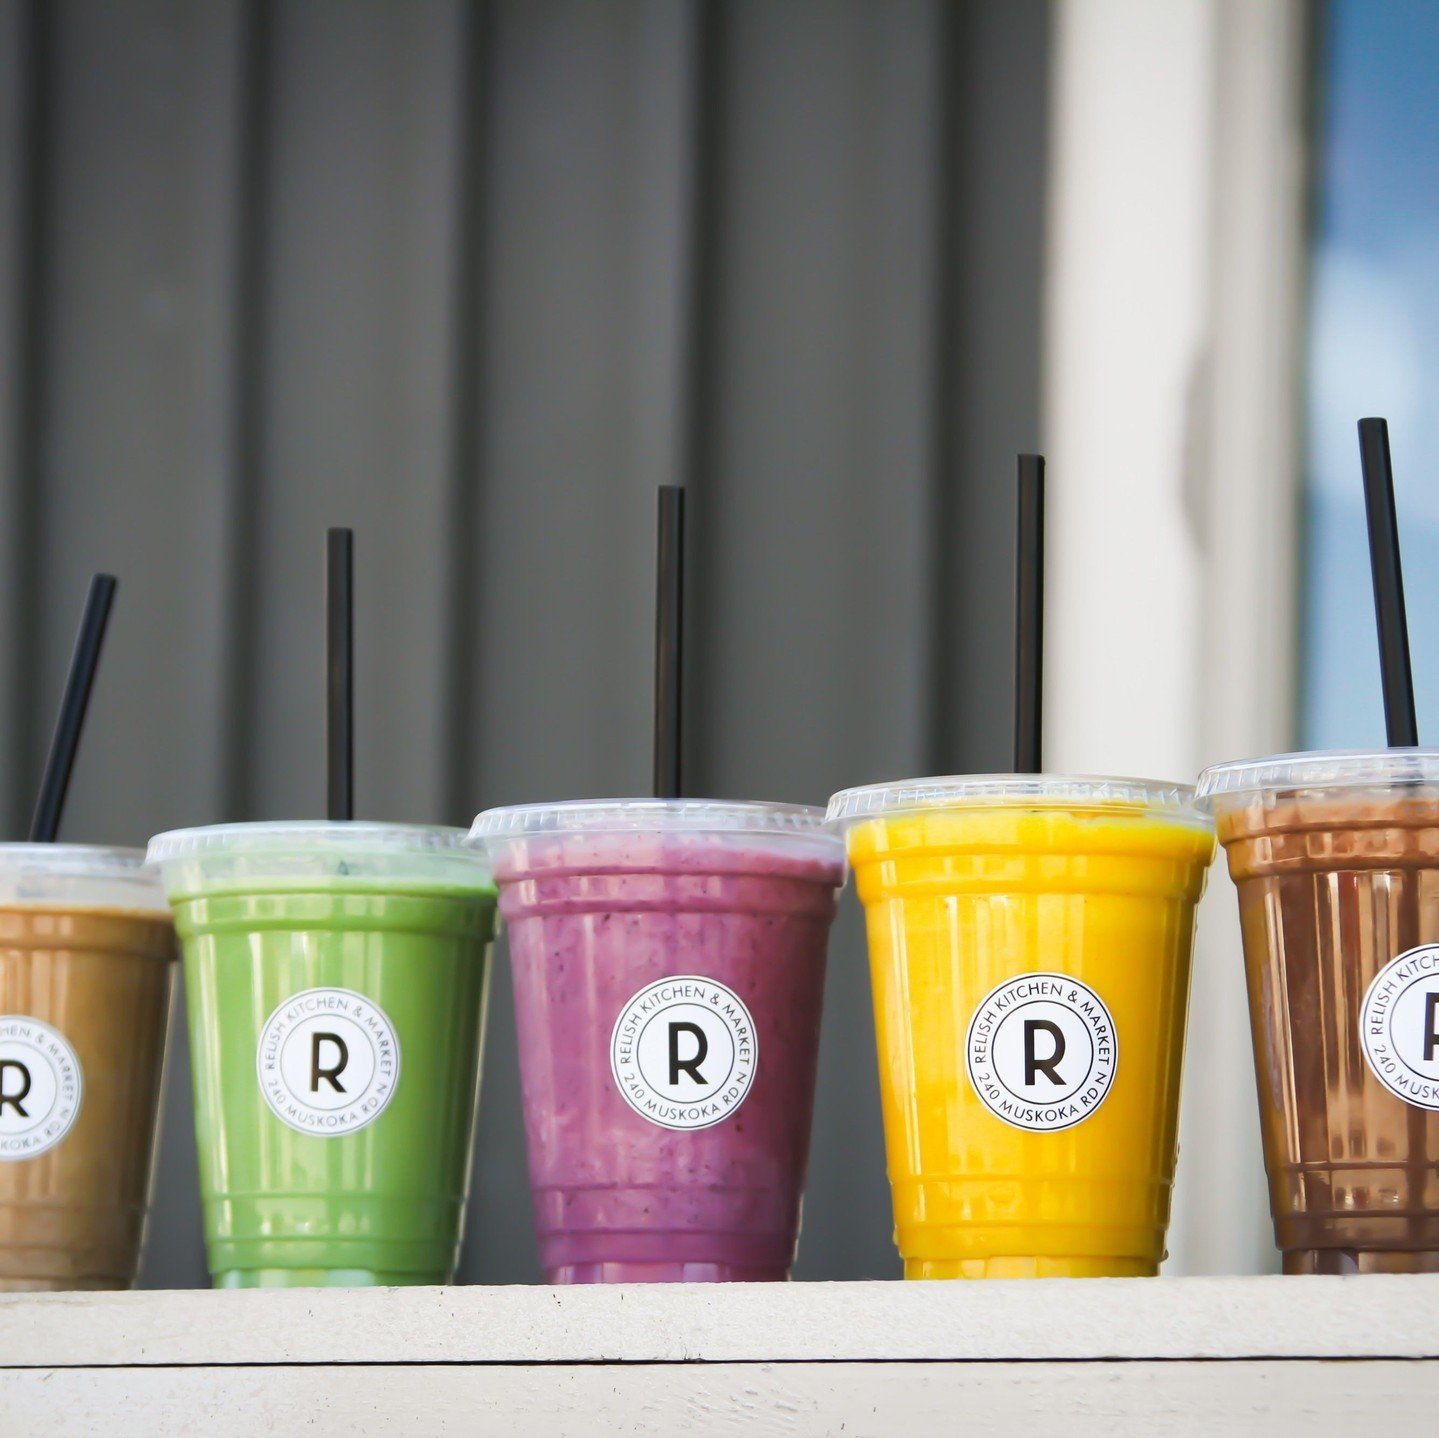 Smoothie season is back 🍌 and our lineup is bright as ever! Order off our classics menu, or craft your own for the perfect smoothie experience. ⁠
⁠
#relishmuskoka #smoothies #muskoka